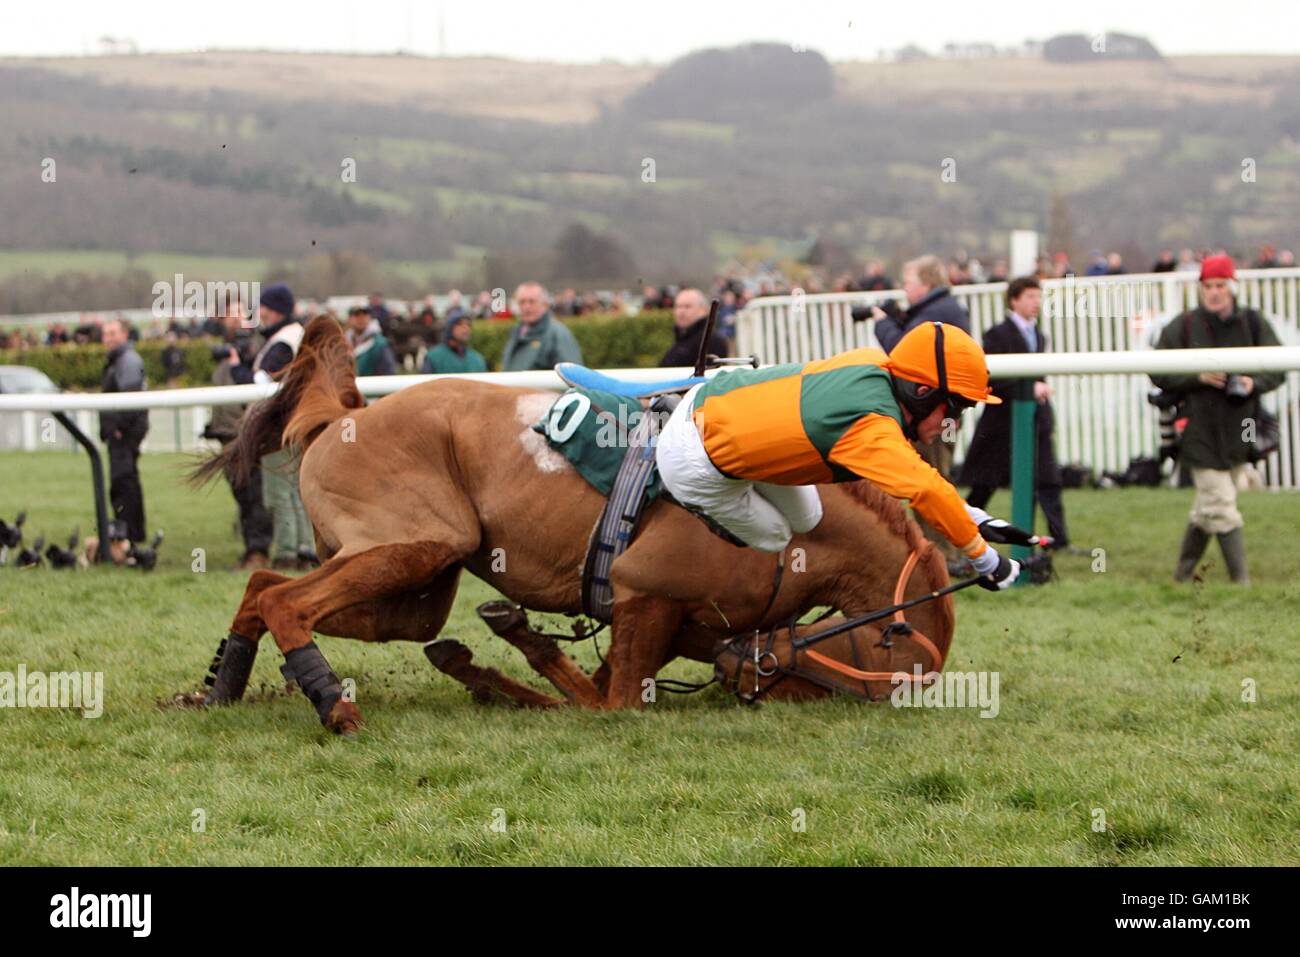 Horse Racing - Cheltenham Festival - Day Three - Cheltenham Racecourse. In Accord, ridden by jockey Thomas Greenall, falls in the Peter O'Sullevan National Hunt Chase Challenge Cup during the Cheltenham Festival. Stock Photo